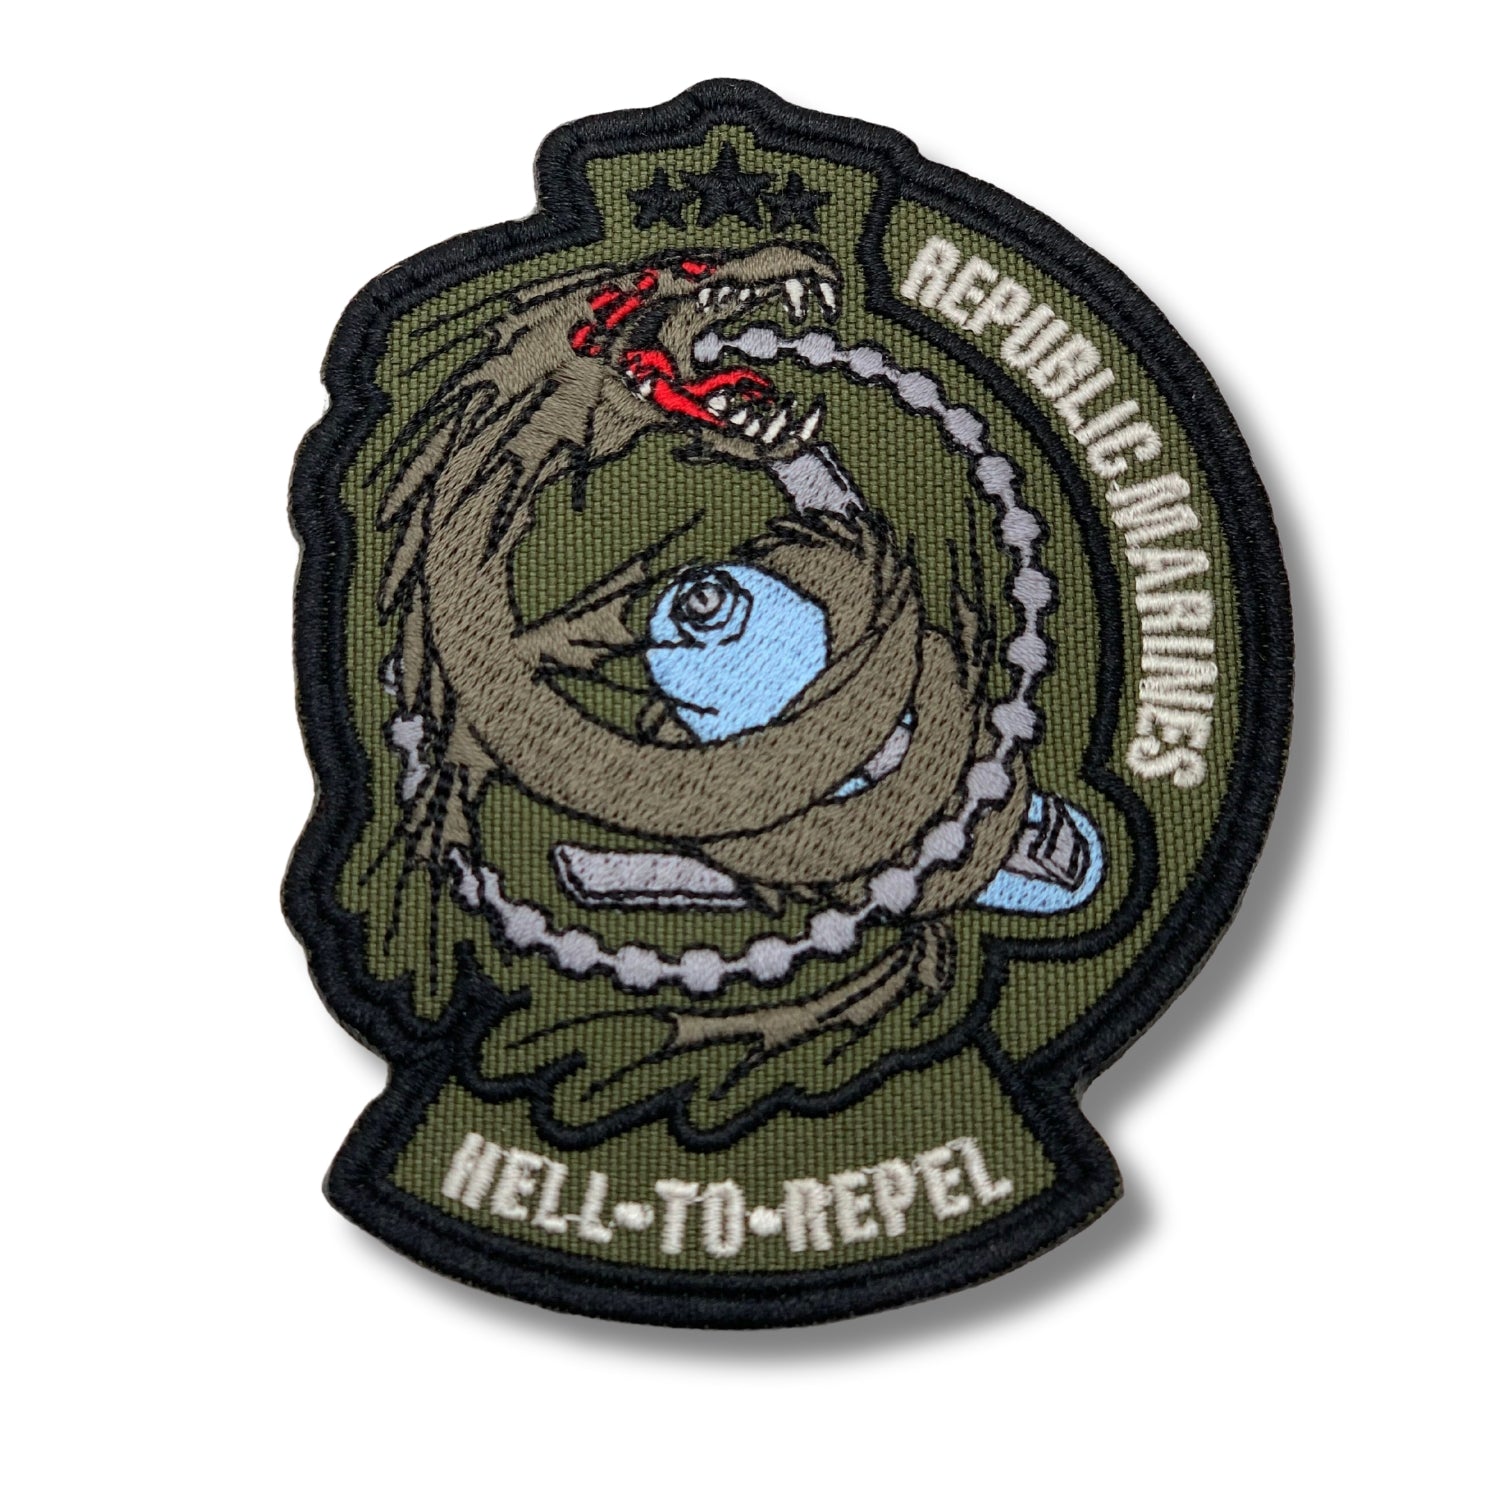 Hullbuster Republic Marines Patch